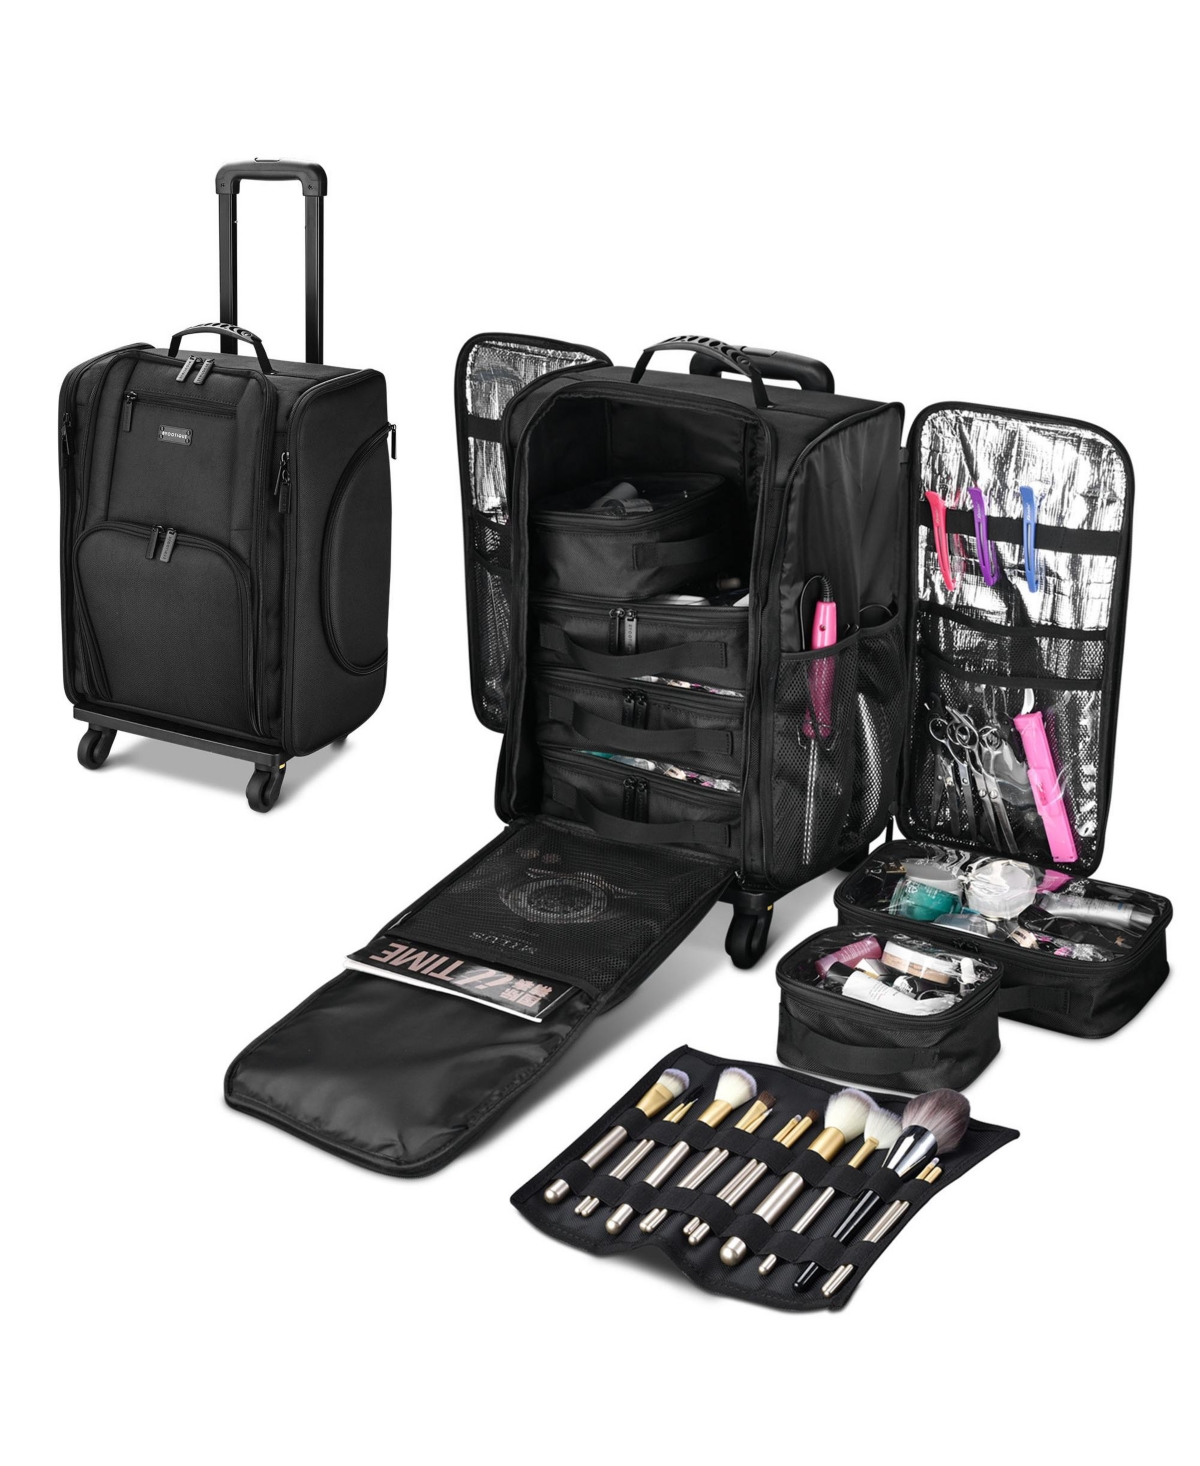 Soft Sided Rolling Makeup Train Case Cosmetic Organizer Travel Artists - Black